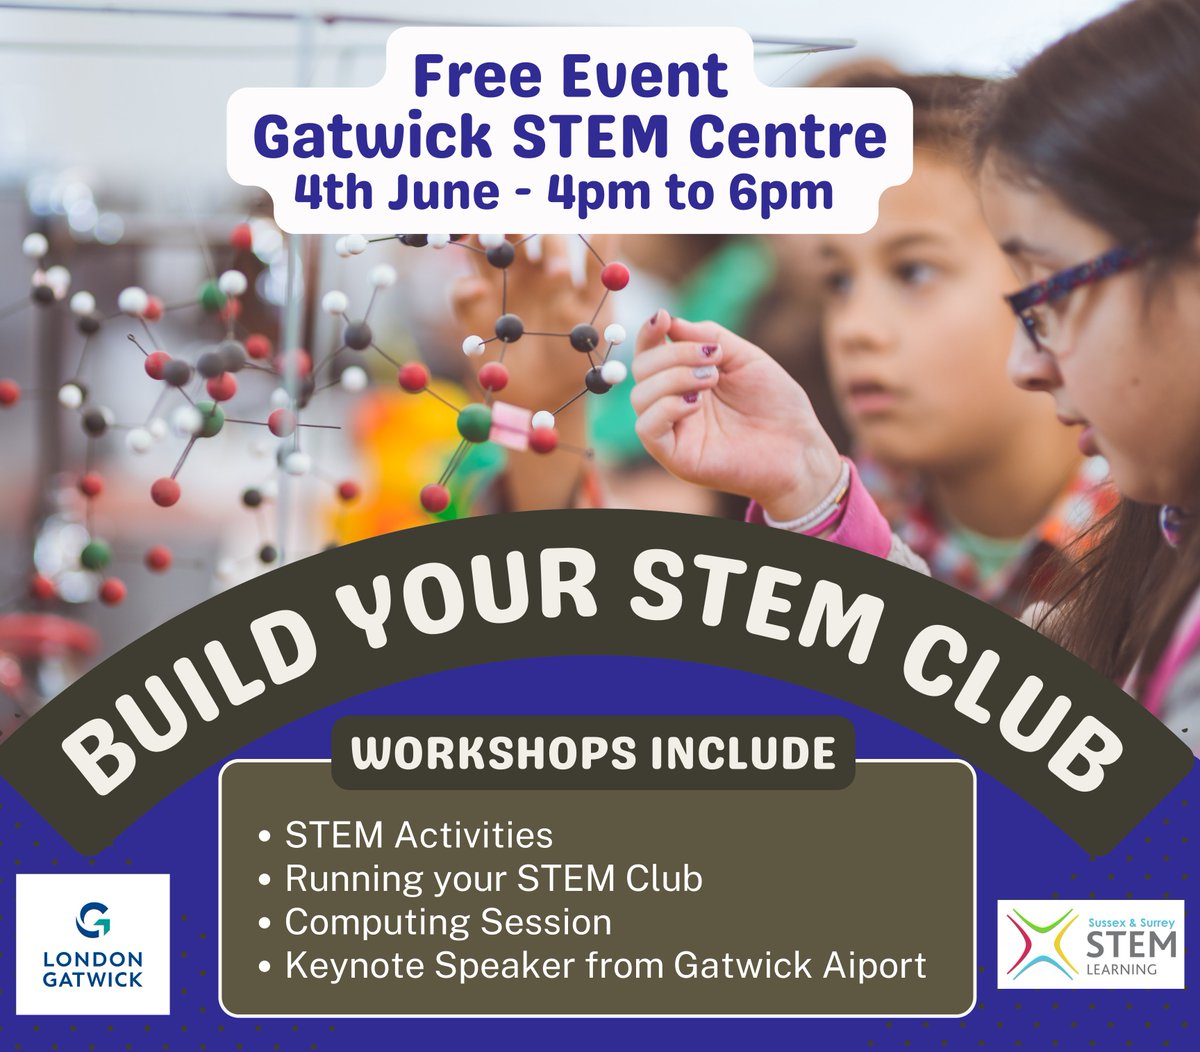 We're very excited about this FREE event in collaboration with #GatwickAirport helping #schools  build their STEM Club. With exhibitors and different workshops to choose from, book today to ensure you don't miss out: bit.ly/buildyourstemc…